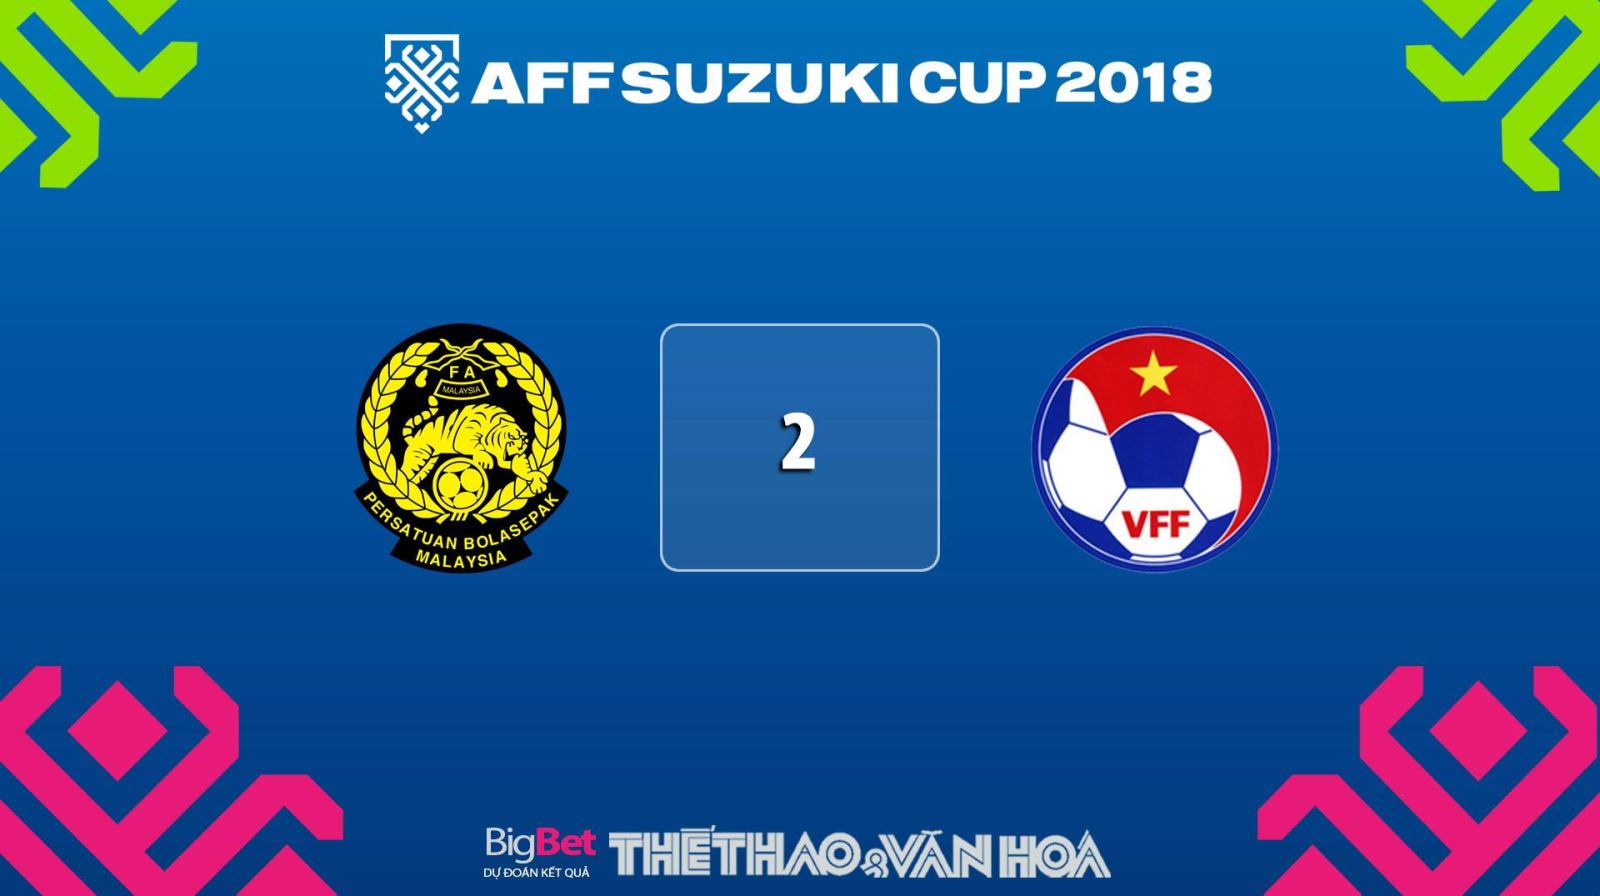 AFF Cup, AFF Cup 2018, Lịch thi đấu AFF Cup, lịch thi đấu aff cup 2018, lịch aff cup 2018, lịch thi đấu bóng đá, lịch thi đấu bóng đá hôm nay, lịch thi đấu AFF Suzuki Cup 2018